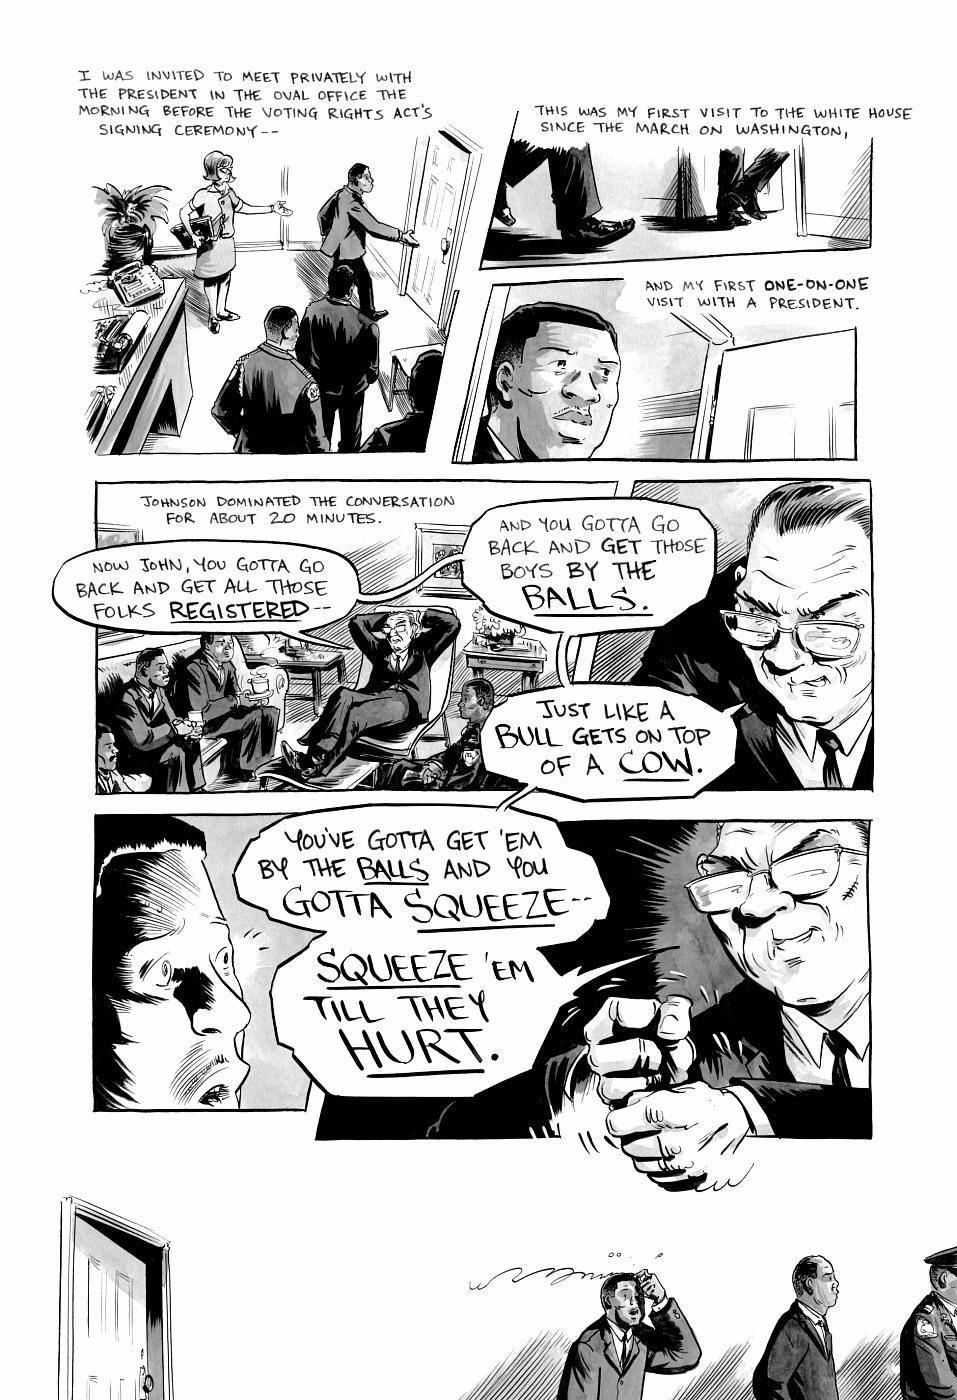 page 241 of march book three graphic novel